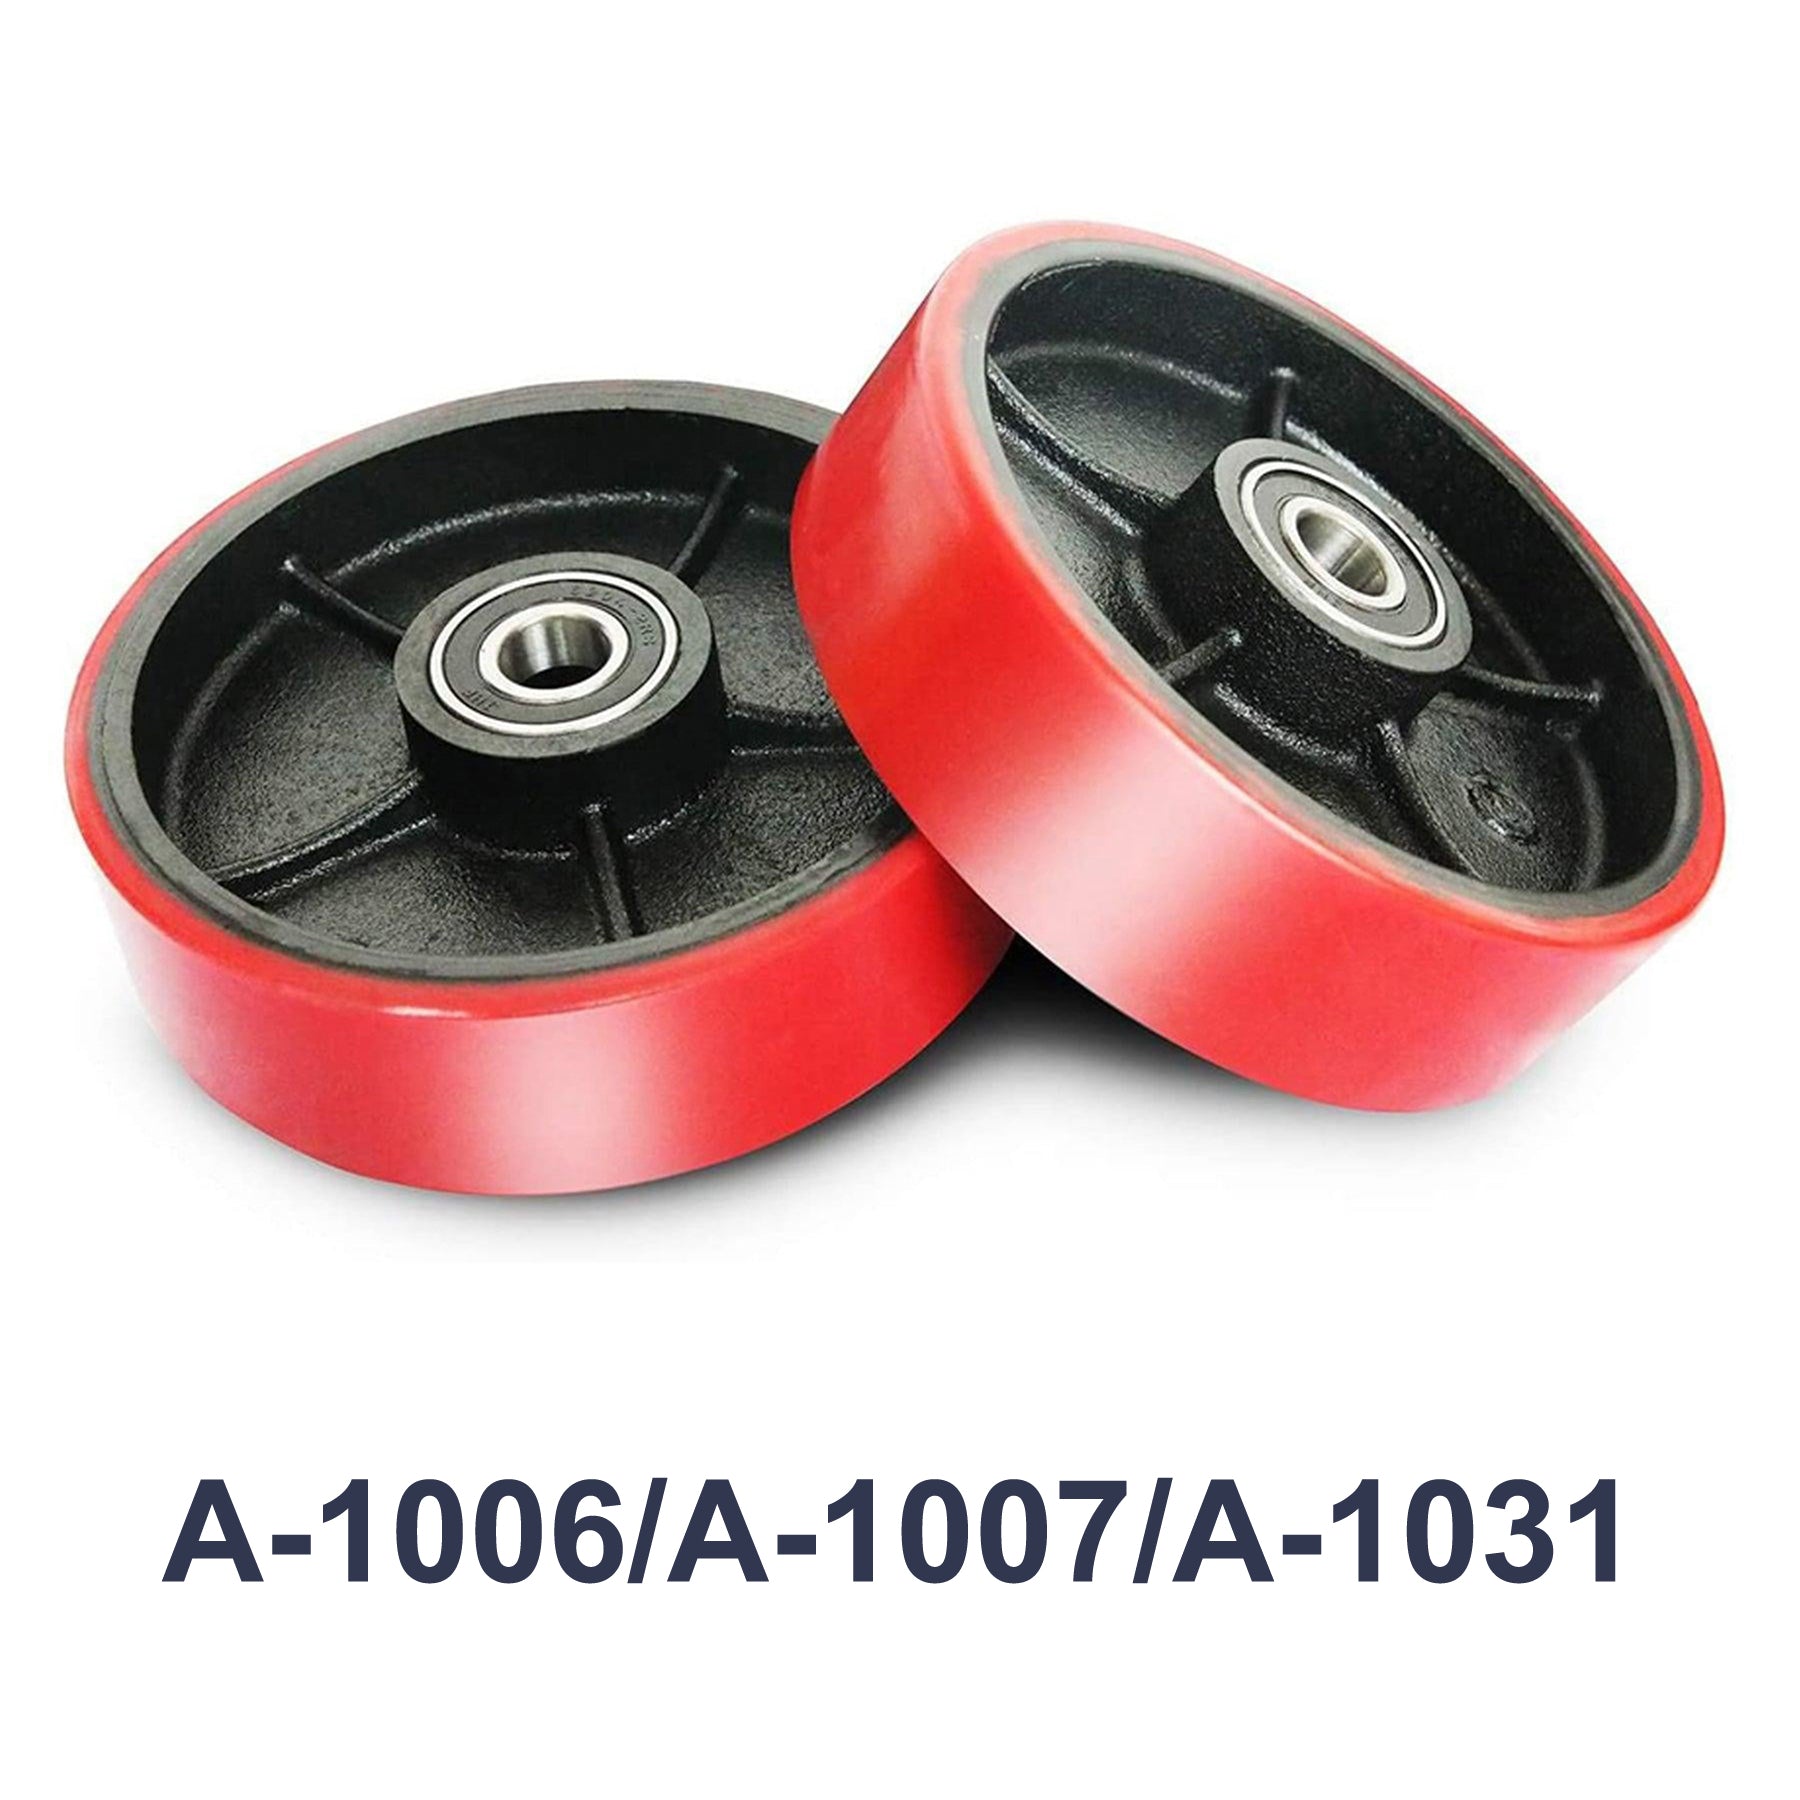 Apollolift 7"x2" PU wheels｜Pallet Jack Replacement Steering Wheels - A-7043